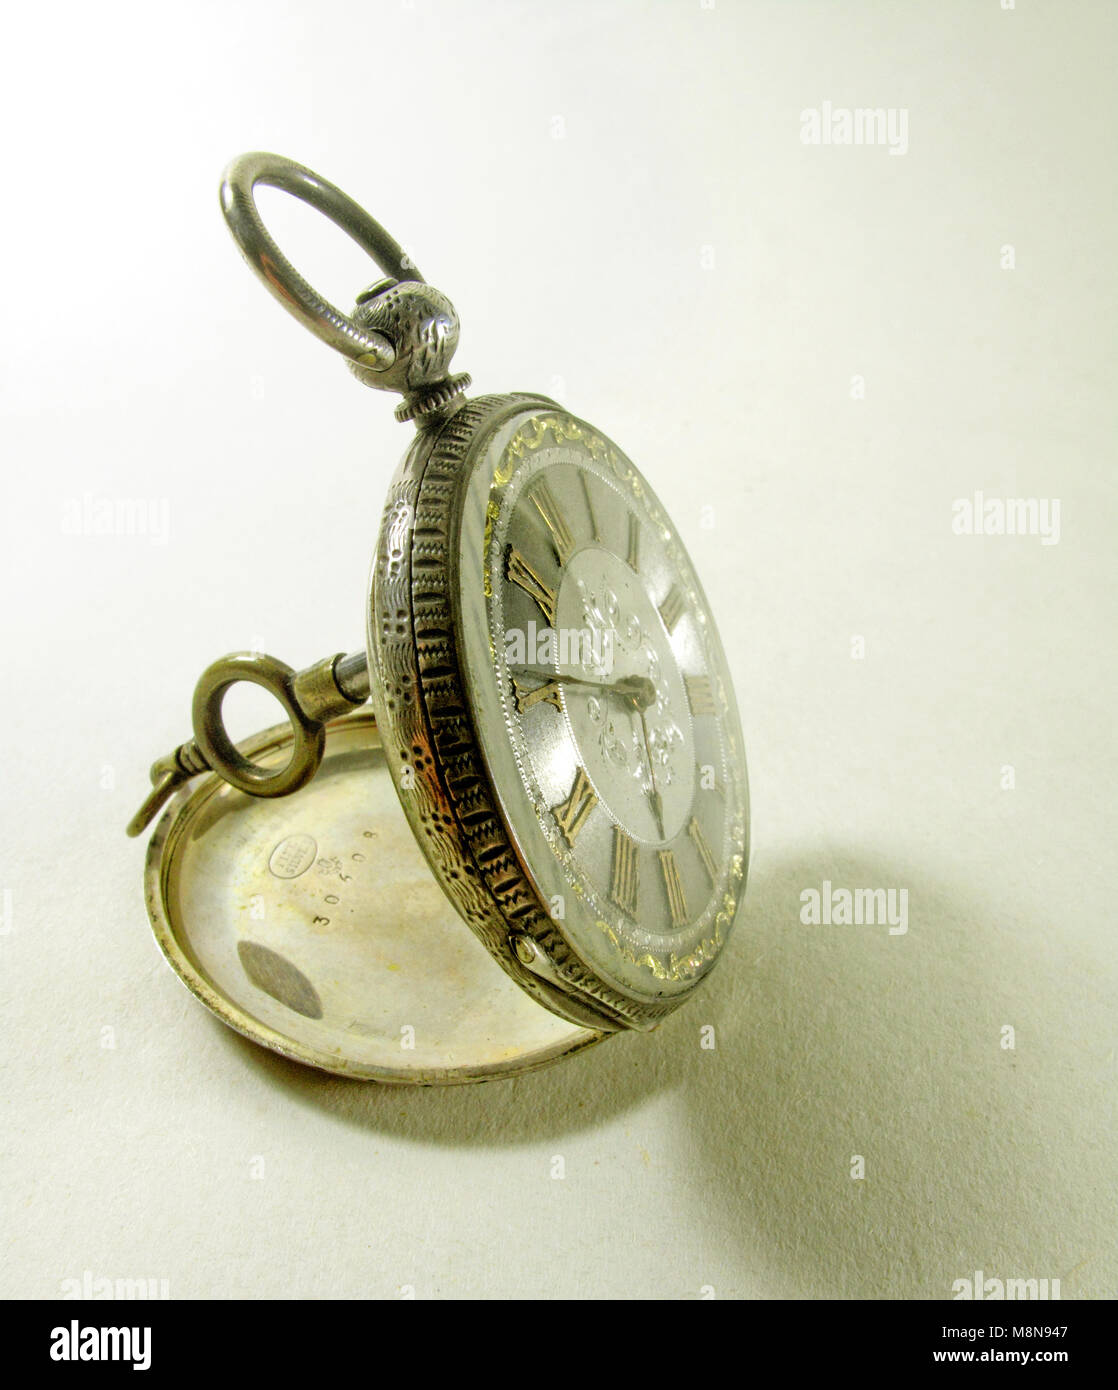 antique pocket watch with winding key seen from the side Stock Photo